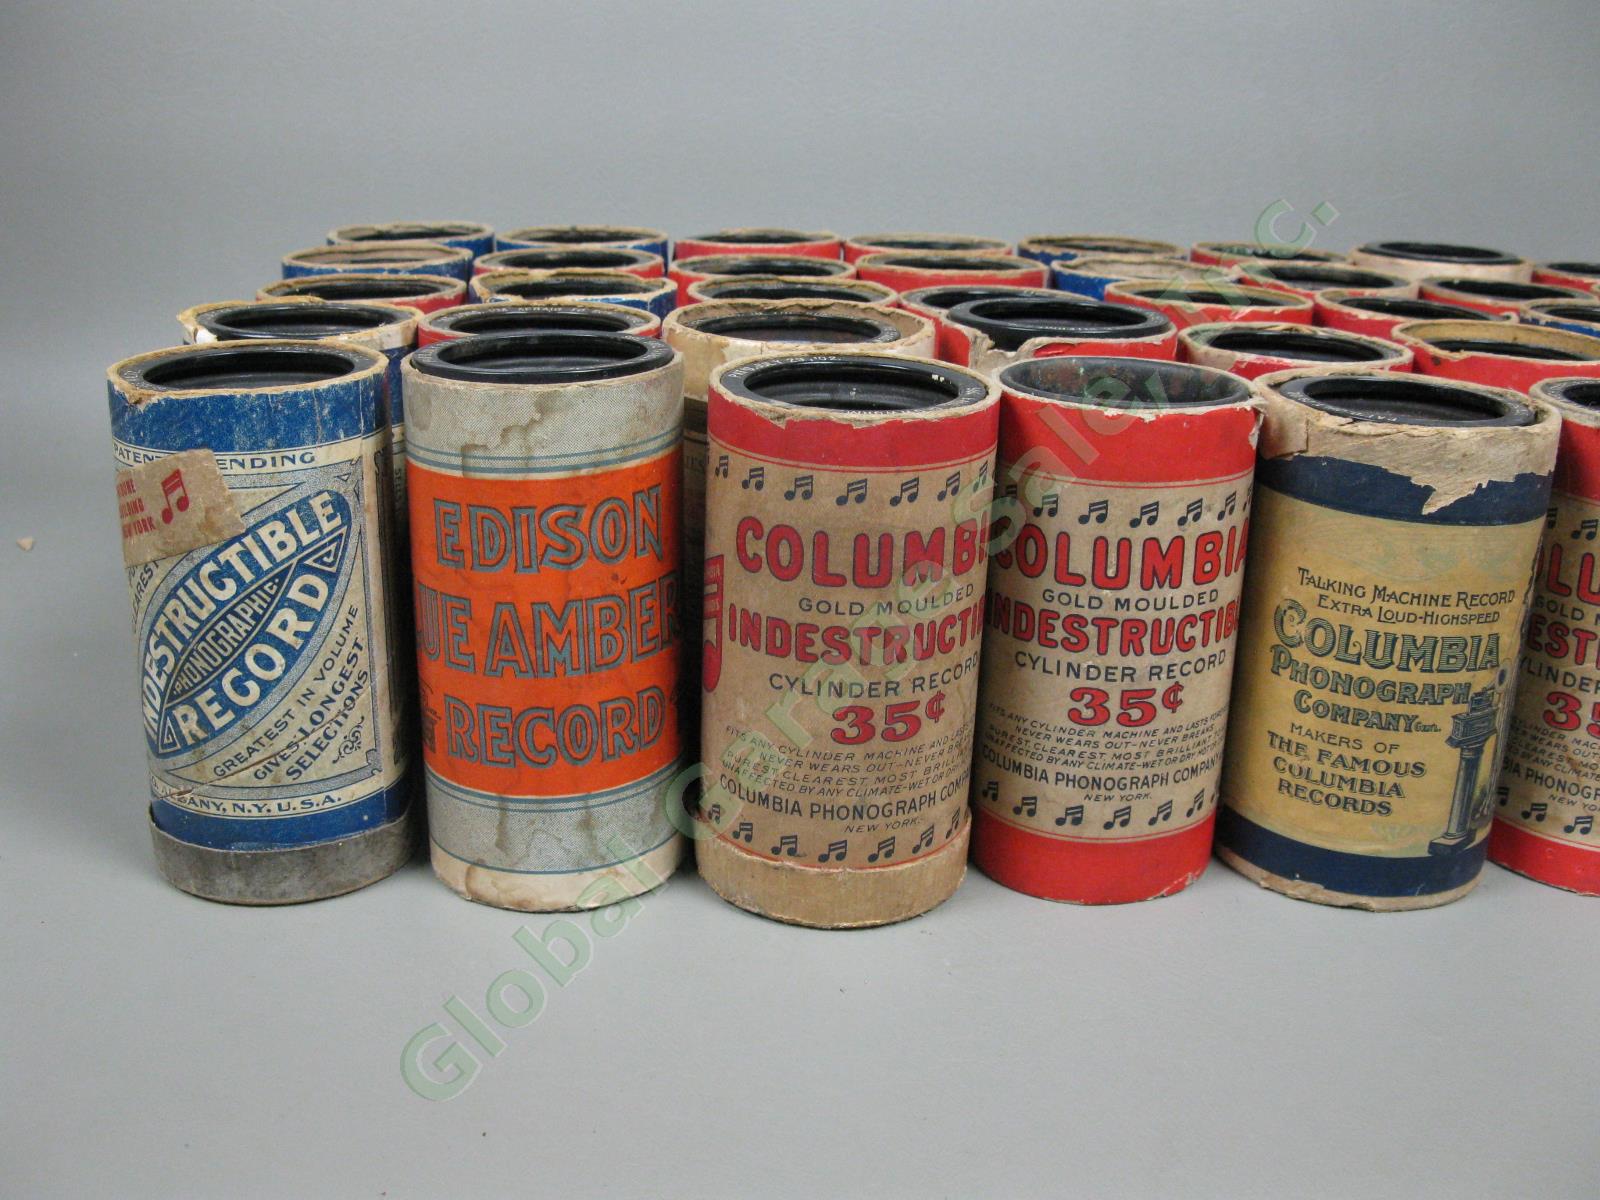 43 RARE Antique Indestructible Columbia Song Cylinder Record Collection Lot Set 1